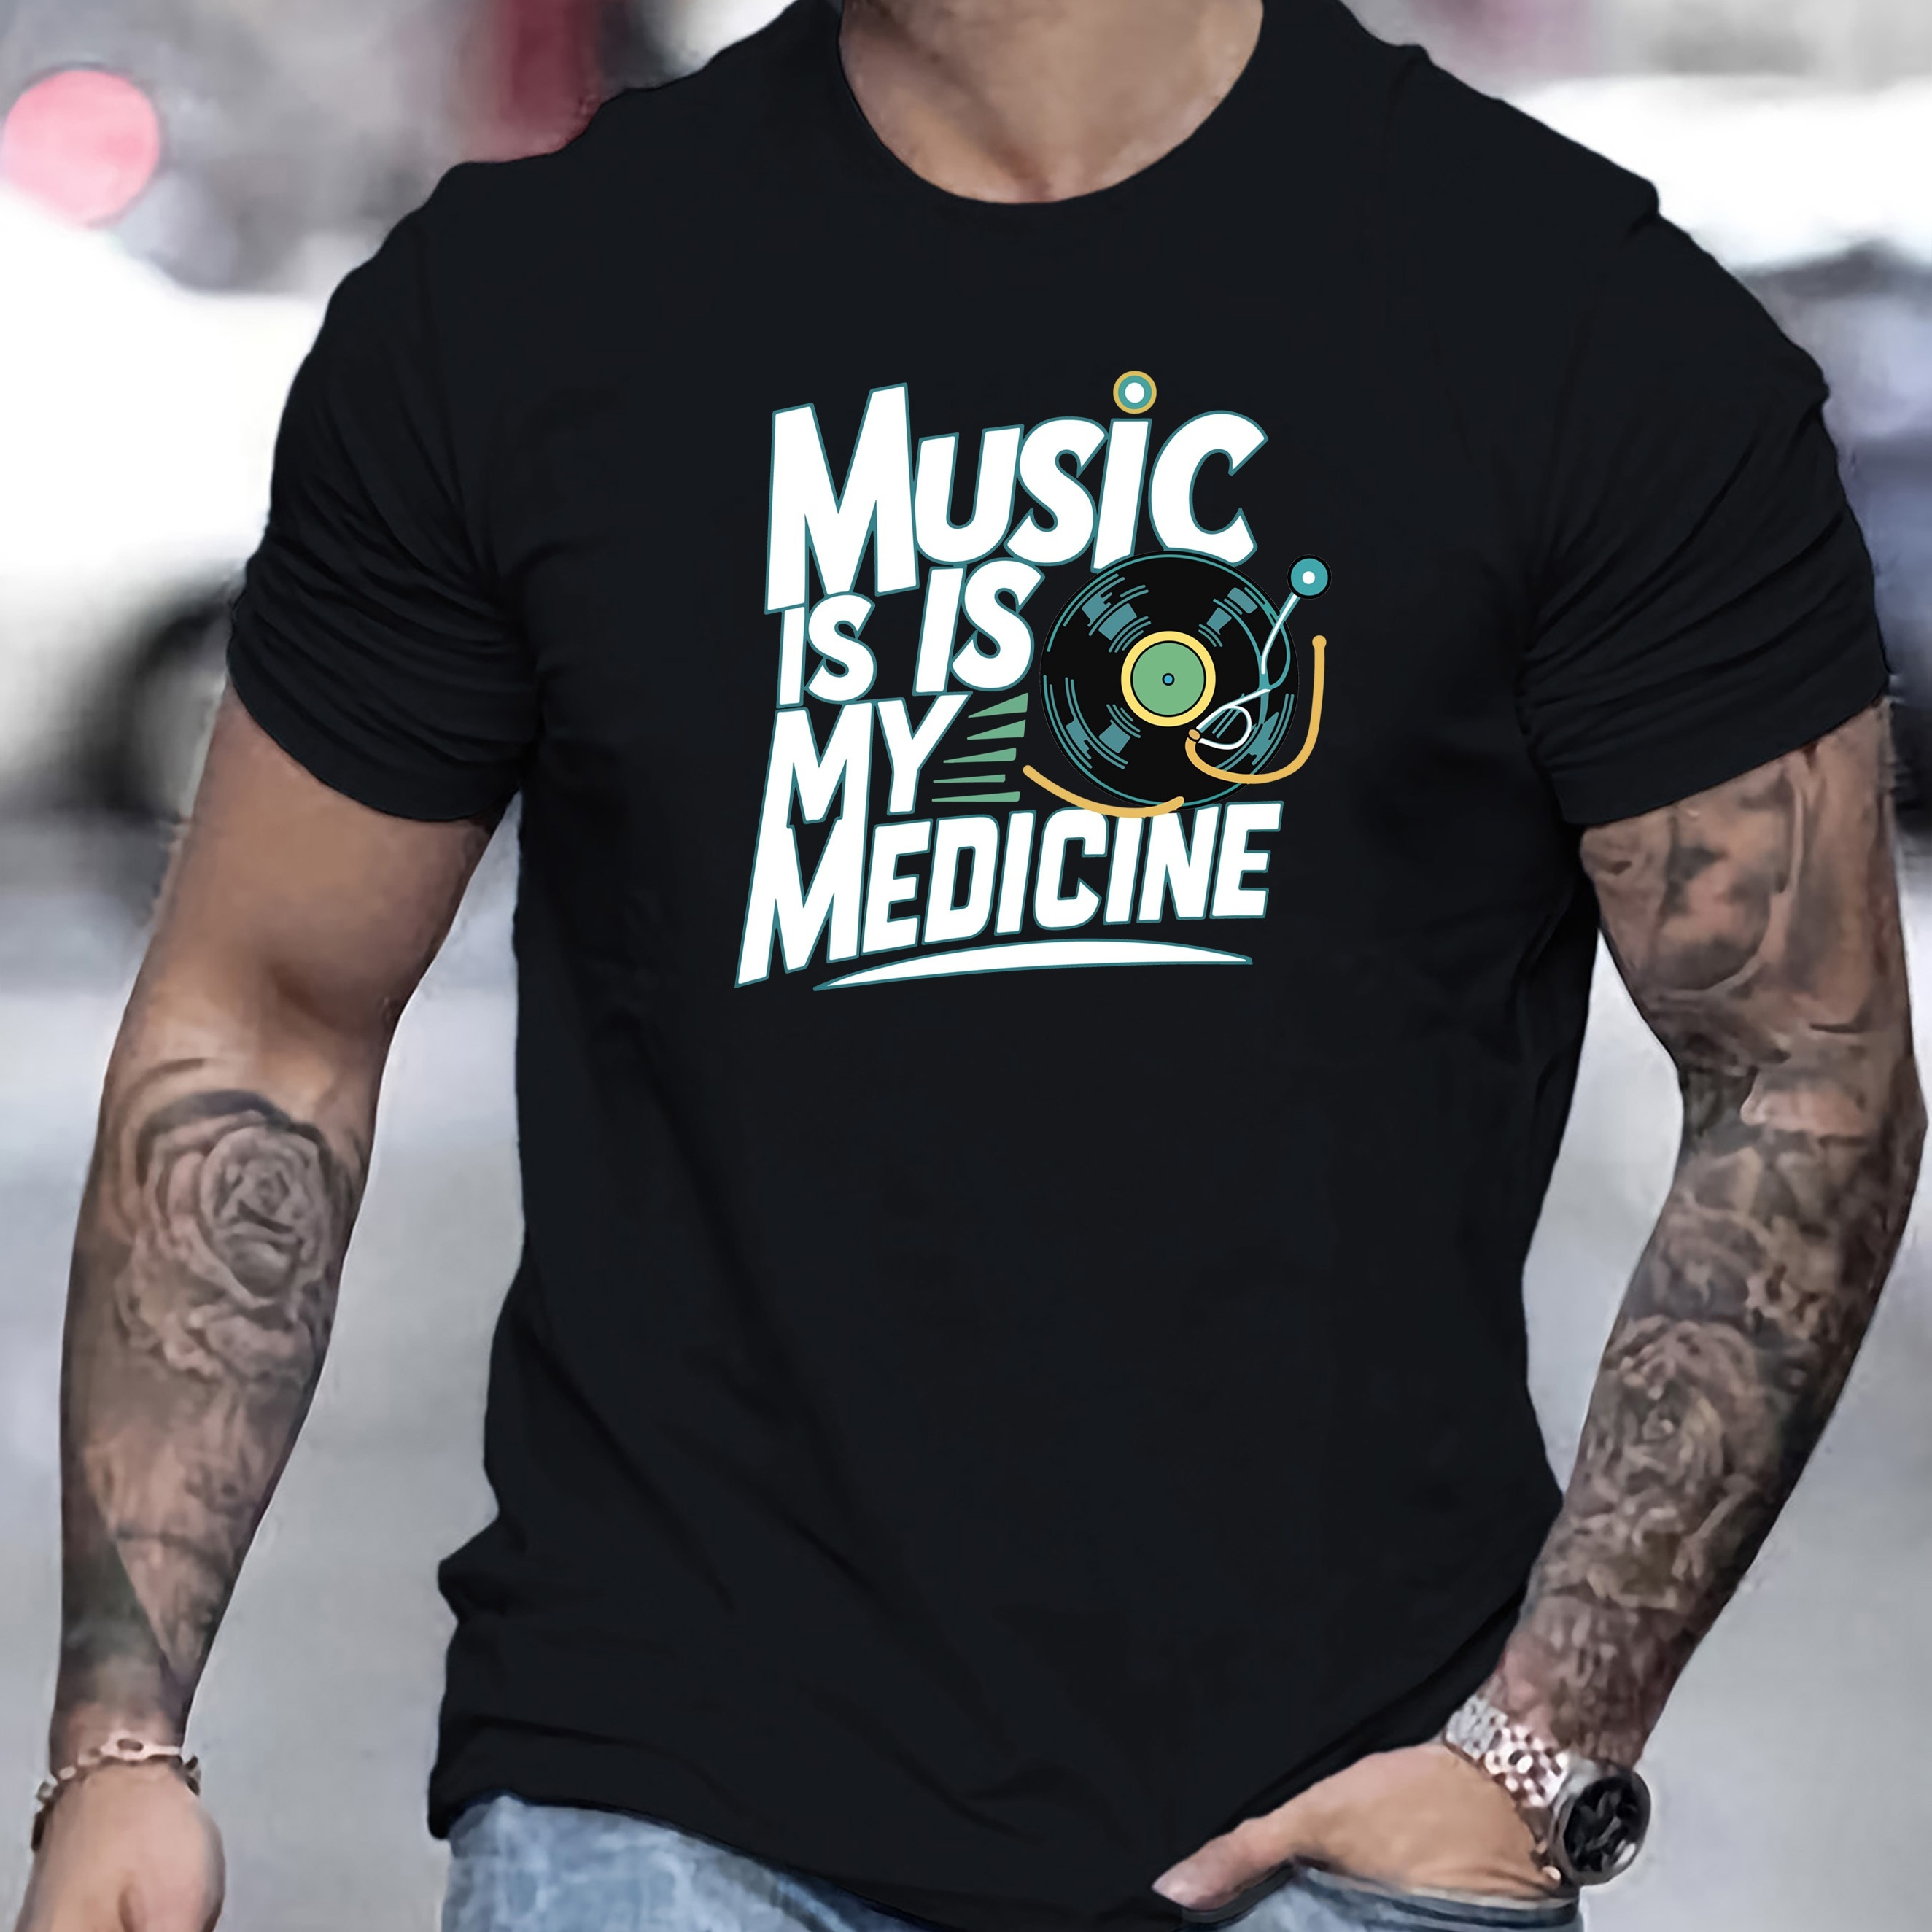 

Men's Casual Novelty T-shirt, " Music Is My Medicine " Creative Print Short Sleeve Summer Top, Comfort Fit, Stylish Crew Neck Tee For Daily Wear